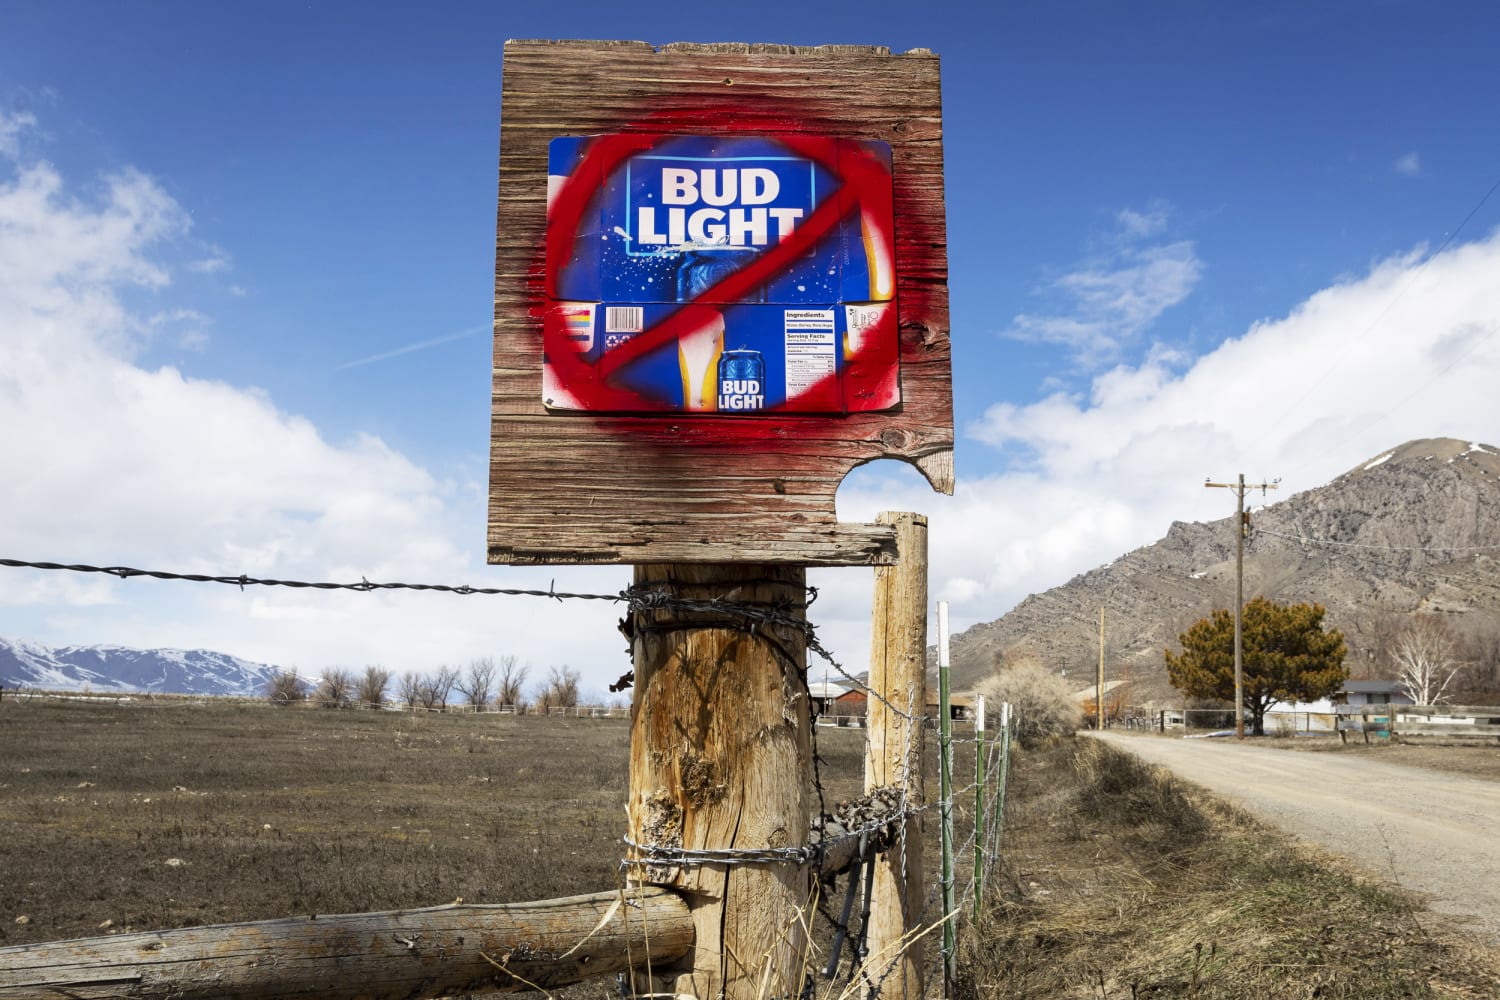 'Nobody imagined it would go on this long': Bud Light sales continue to plummet over Mulvaney backlash